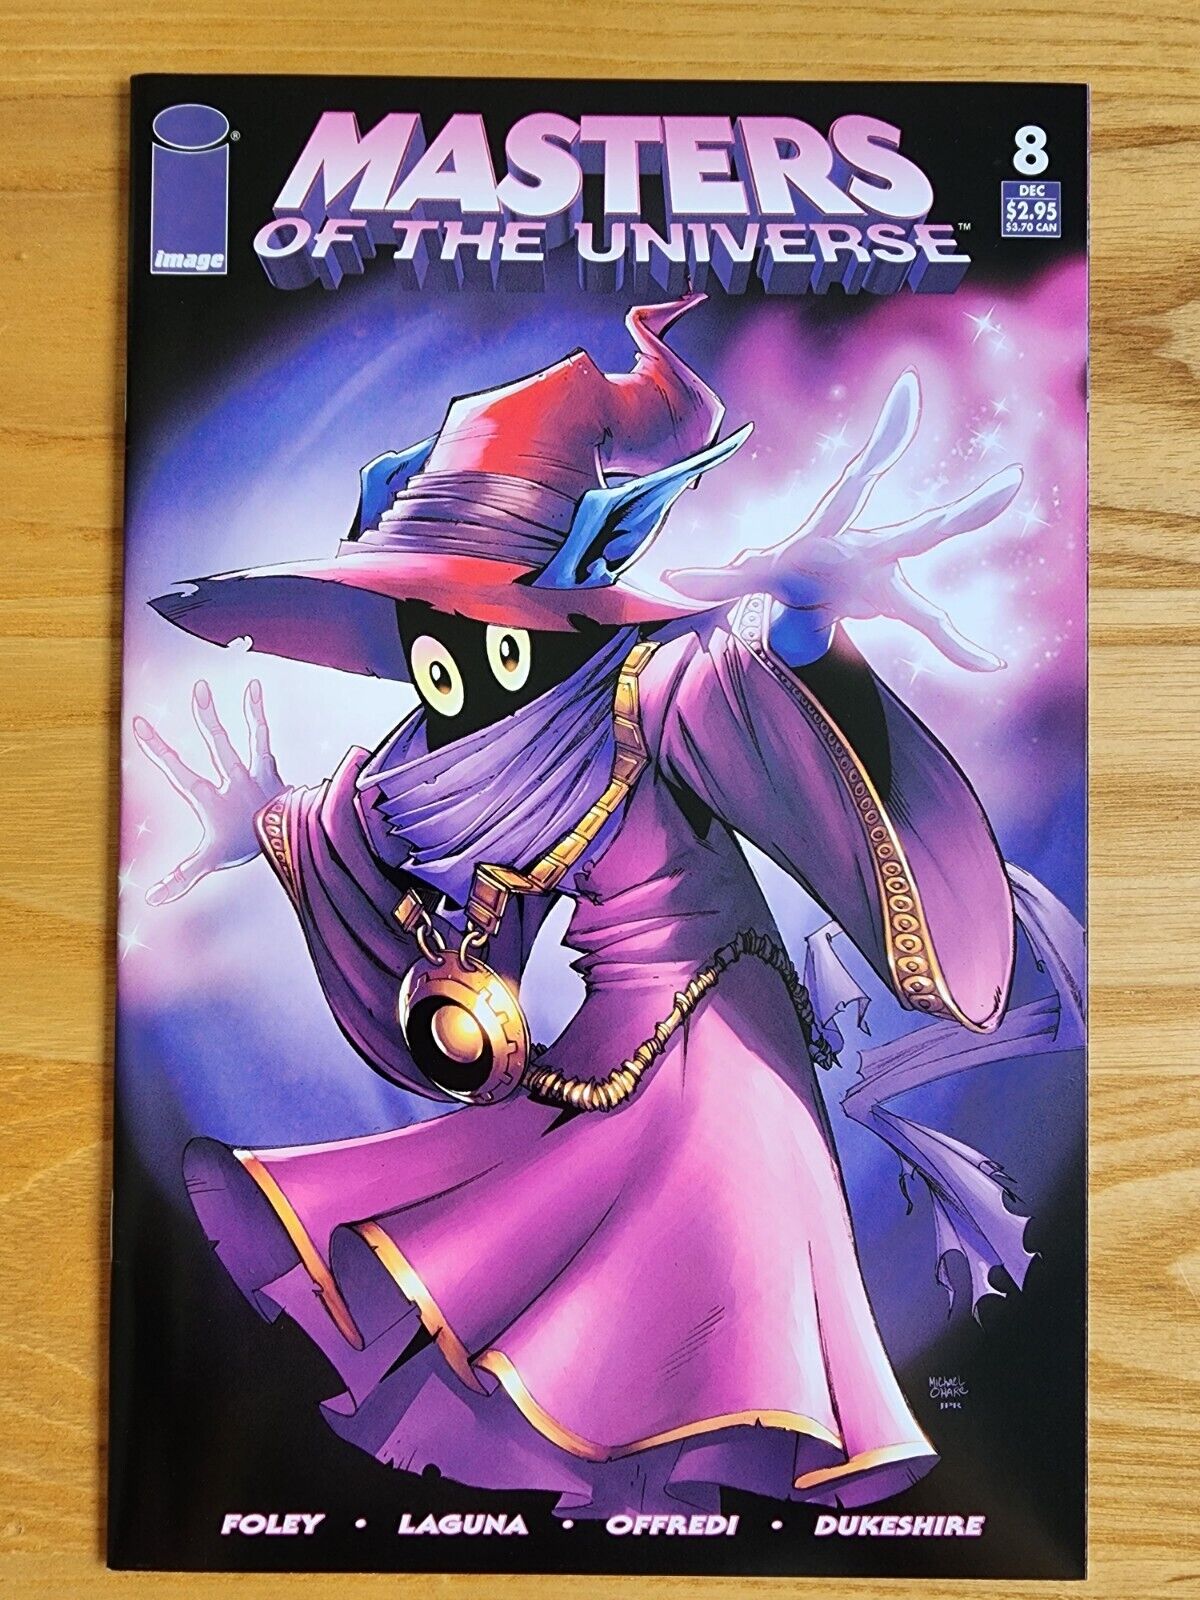 Maaters Of The Universe #8 - Image Comics - VF Final Issue HTF, 2004